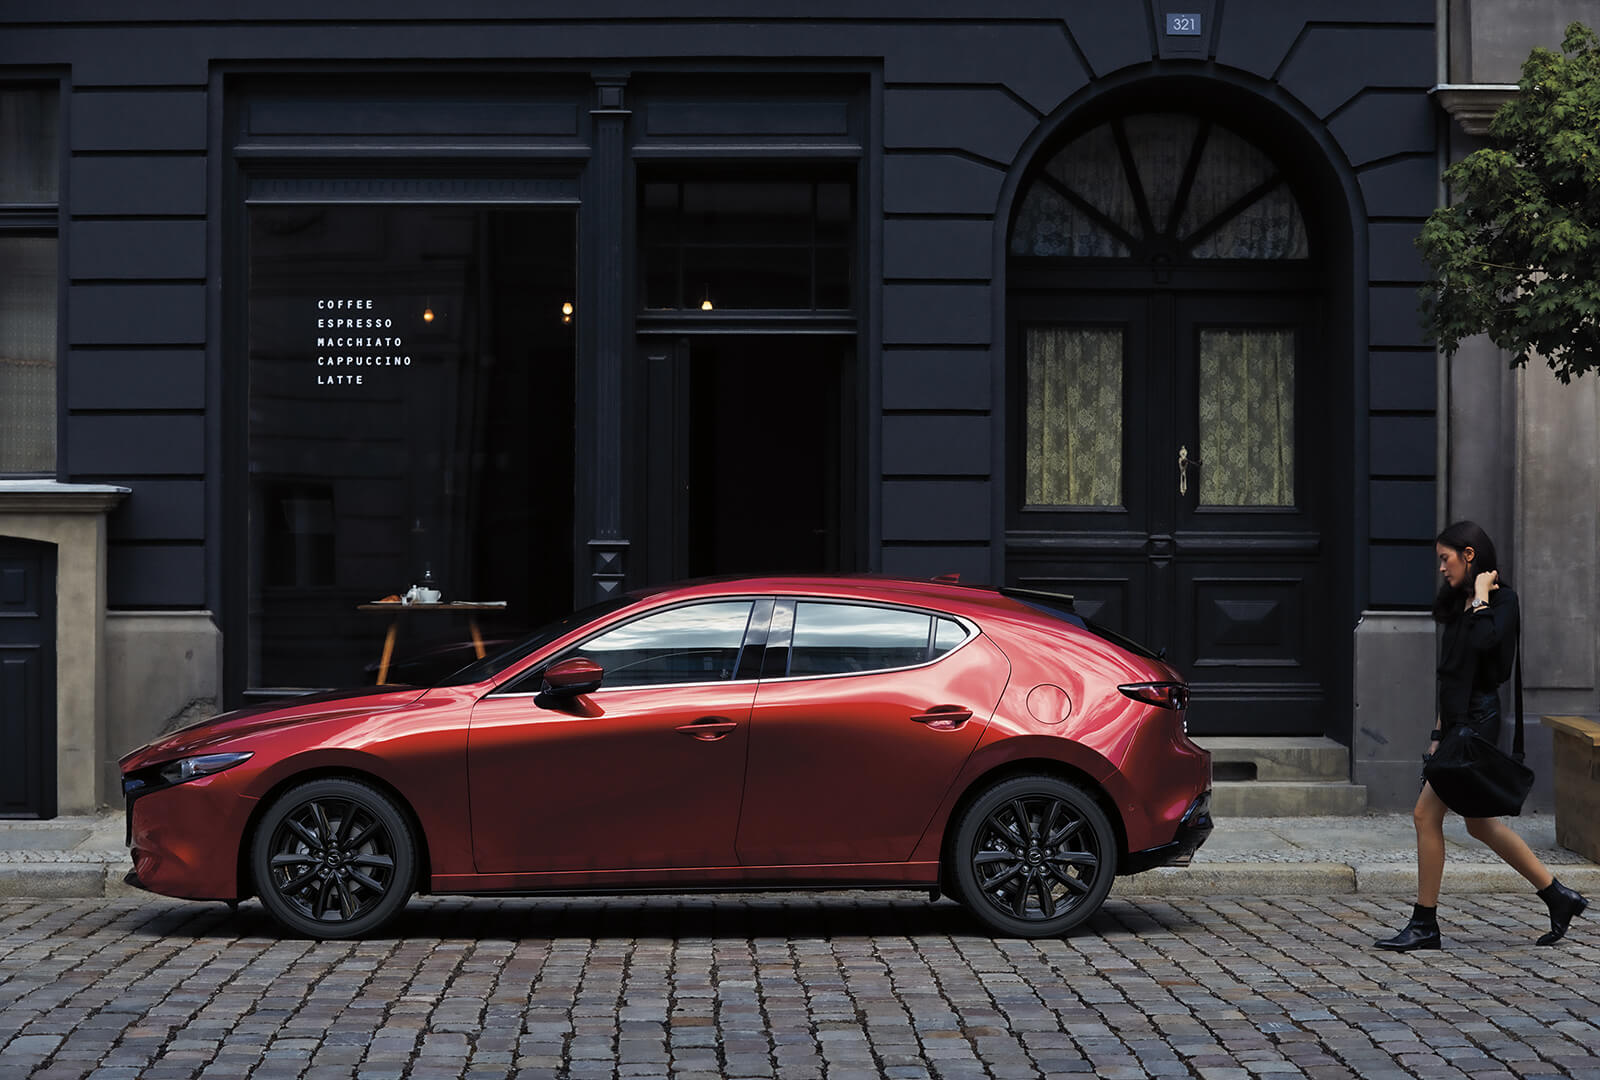 Red Mazda3 side view on cobblestone street with fashionable young woman approaching from right side